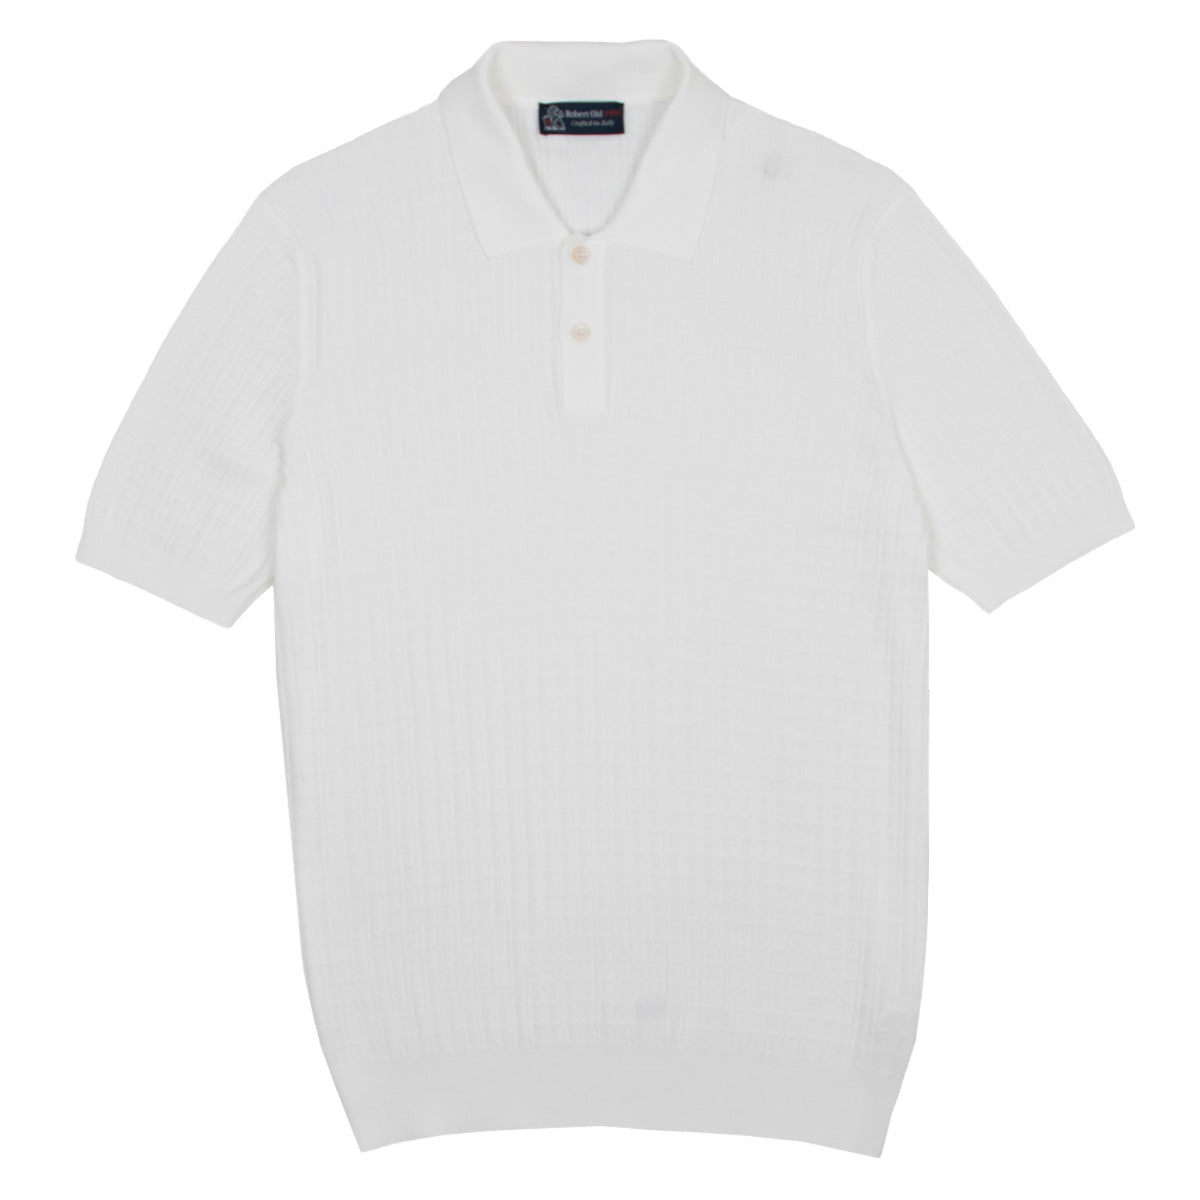 White 100% Cotton Knit Short Sleeve Polo Shirt  Robert Old   